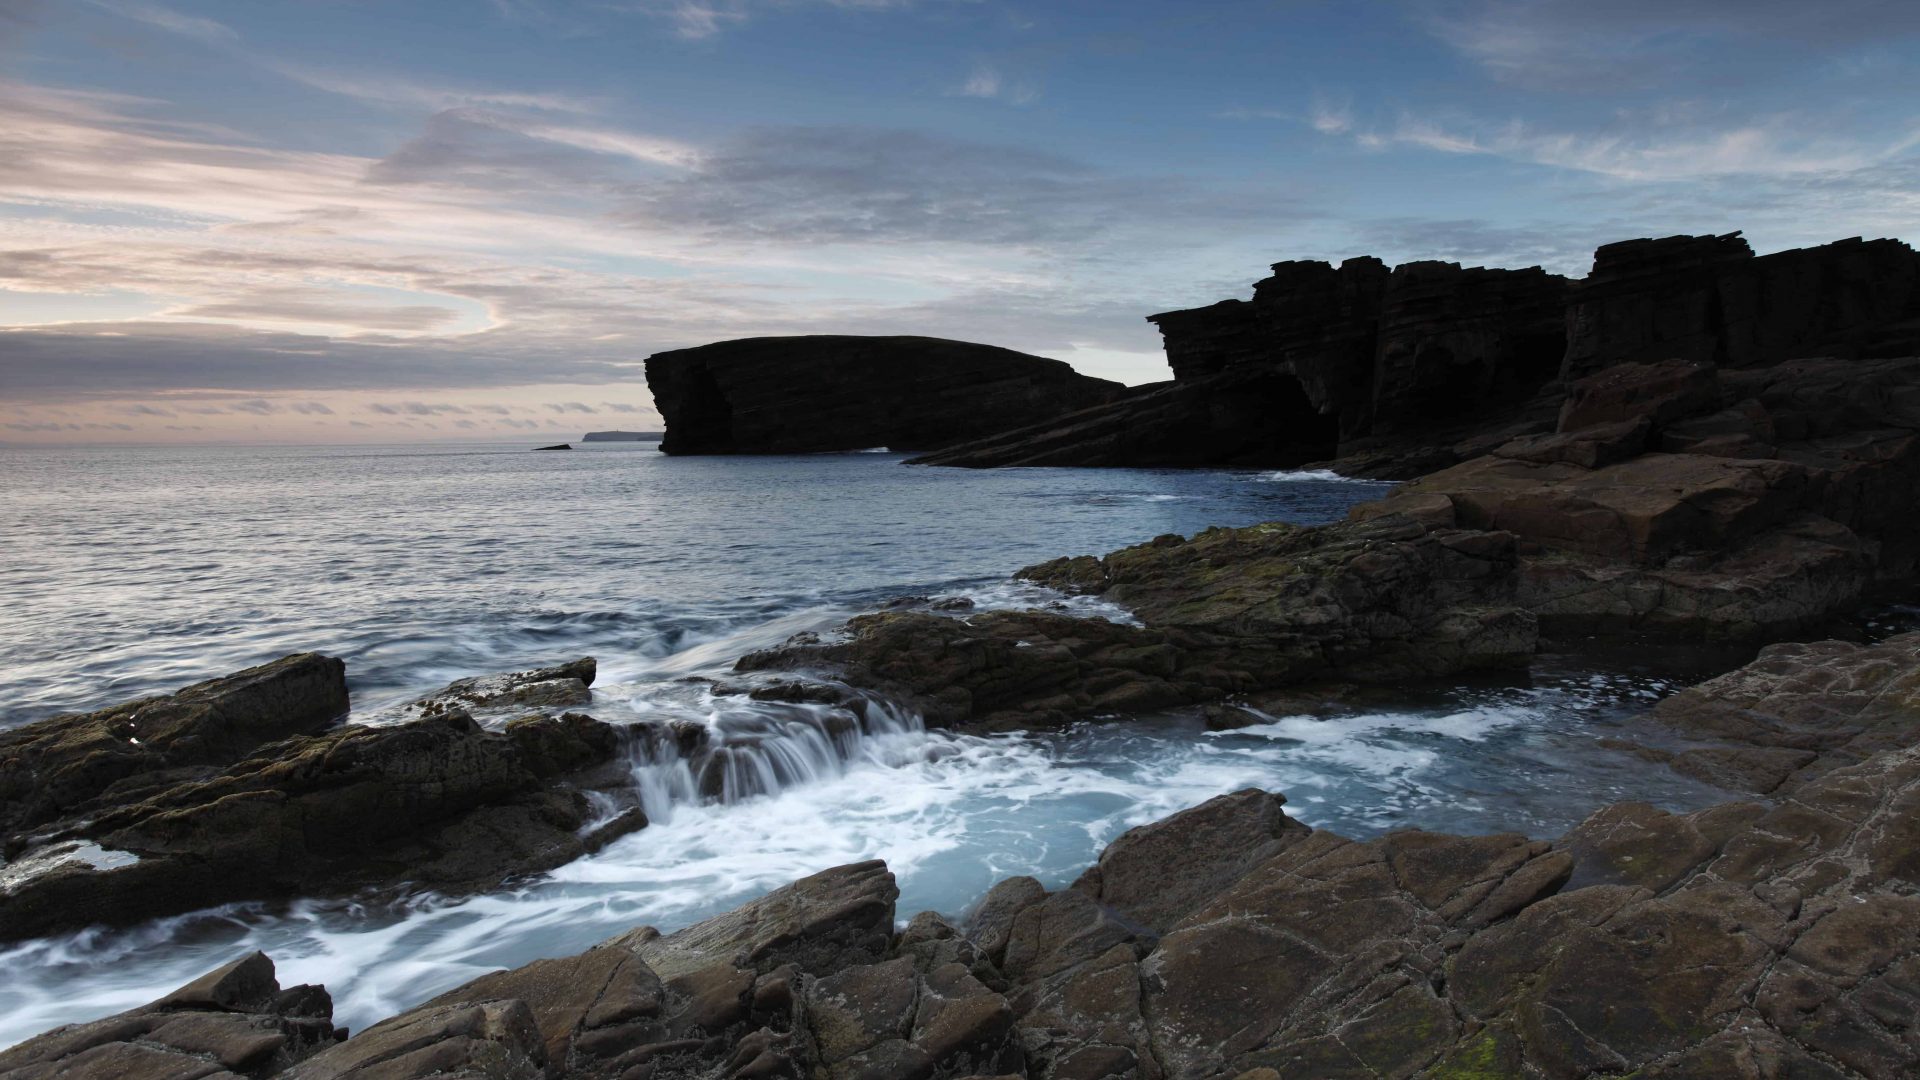 The coastline at Yesnaby at dusk, Mainland, Orkney.
Picture Credit: Paul Tomkins / VisitScotland ? ??????
The coastline at Yesnaby at dusk, Mainland, Orkney.
Picture Credit: Paul Tomkins / VisitScotland         